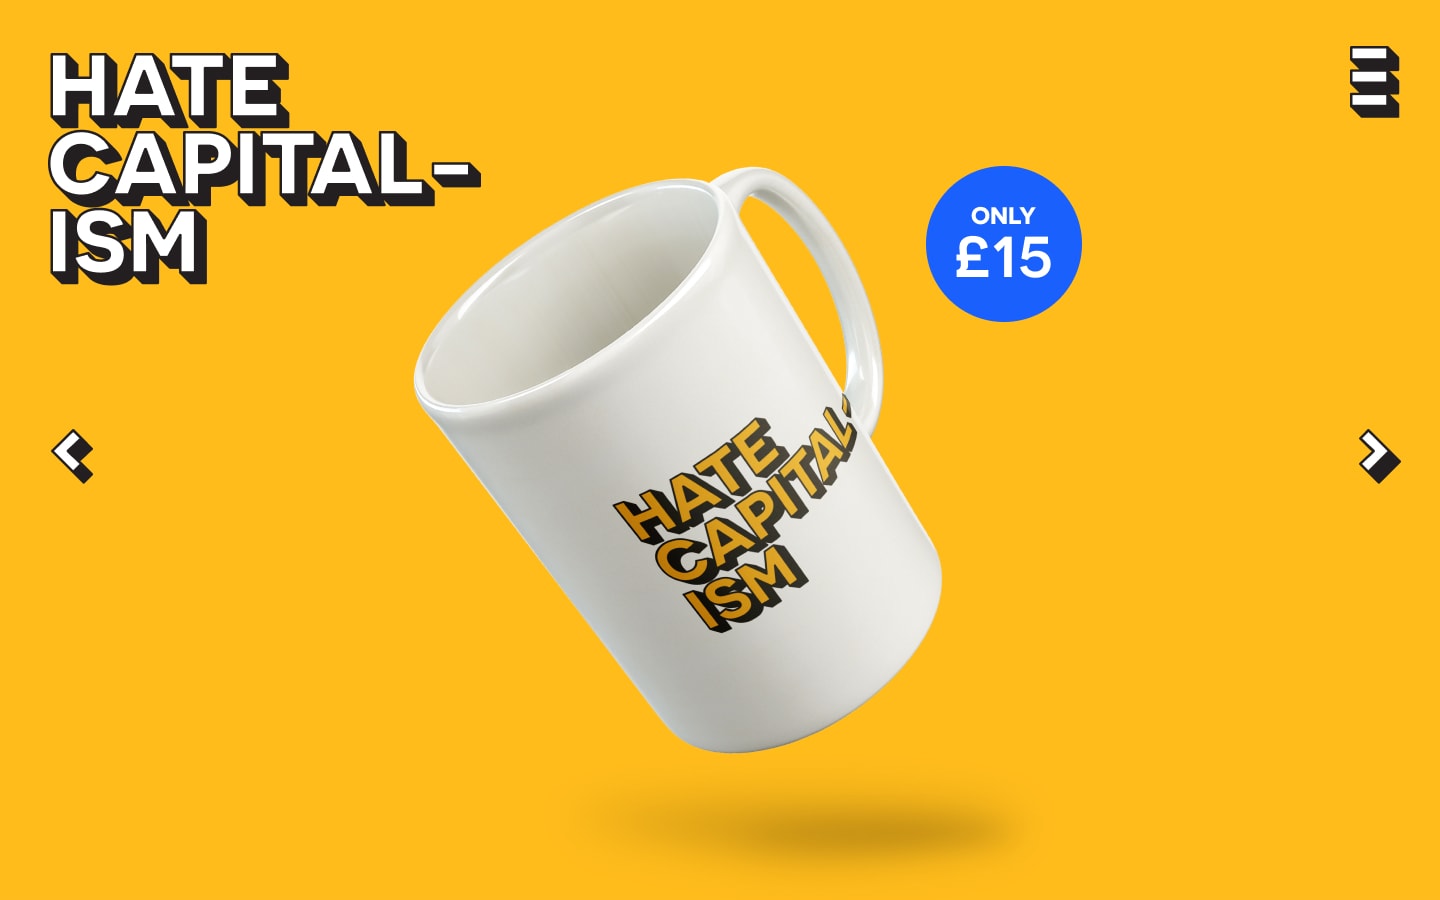 Web page showing mug for sale. It is branded Hate Capitalism